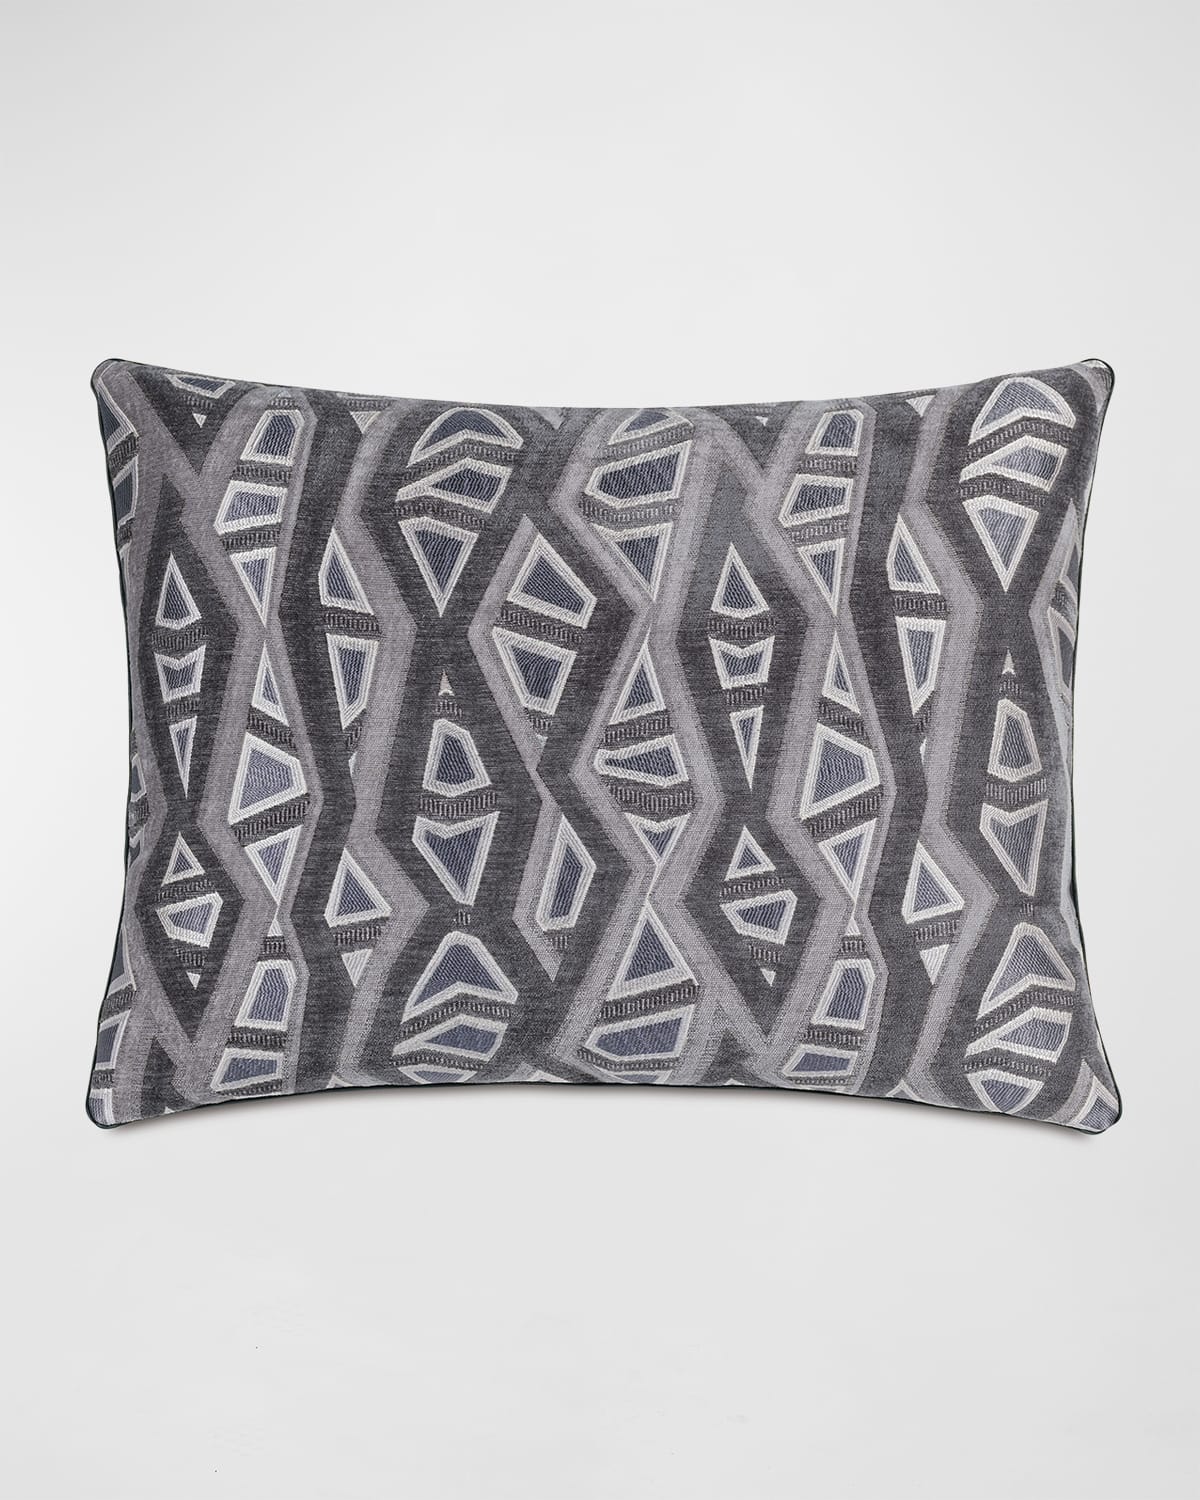 Eastern Accents Noah Geometric Decorative Pillow, 20" X 27" In Assorted